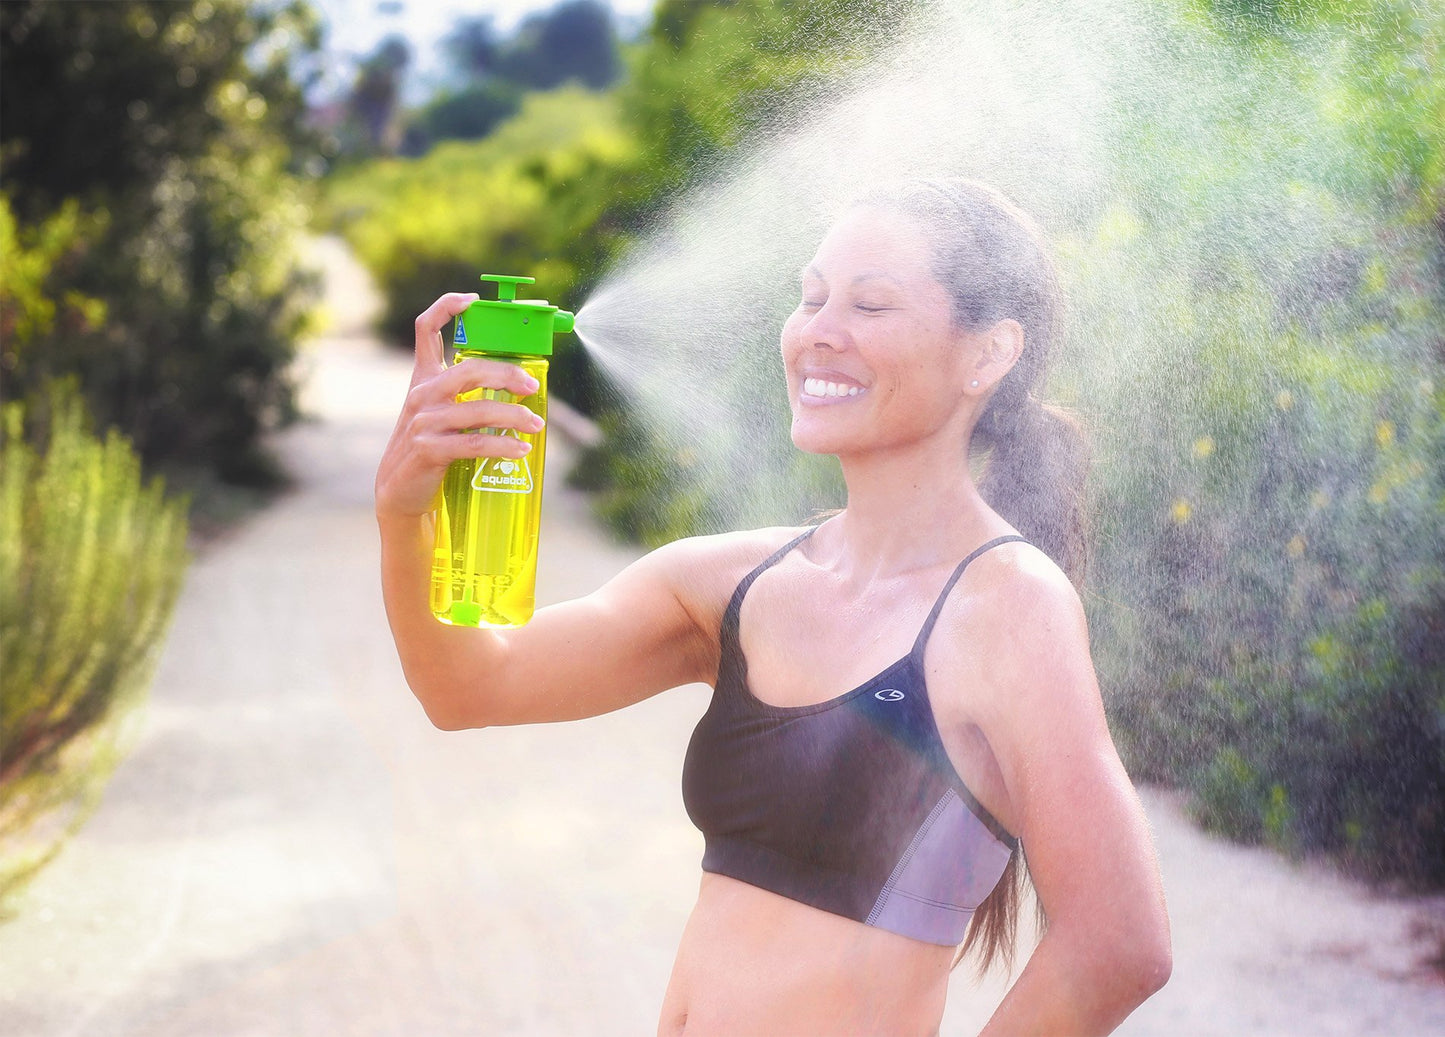 Lunatec Hydration Spray Water Bottle is a pressurized personal mister, camp shower and sport water bottle in one easy-to-use BPA free bottle.